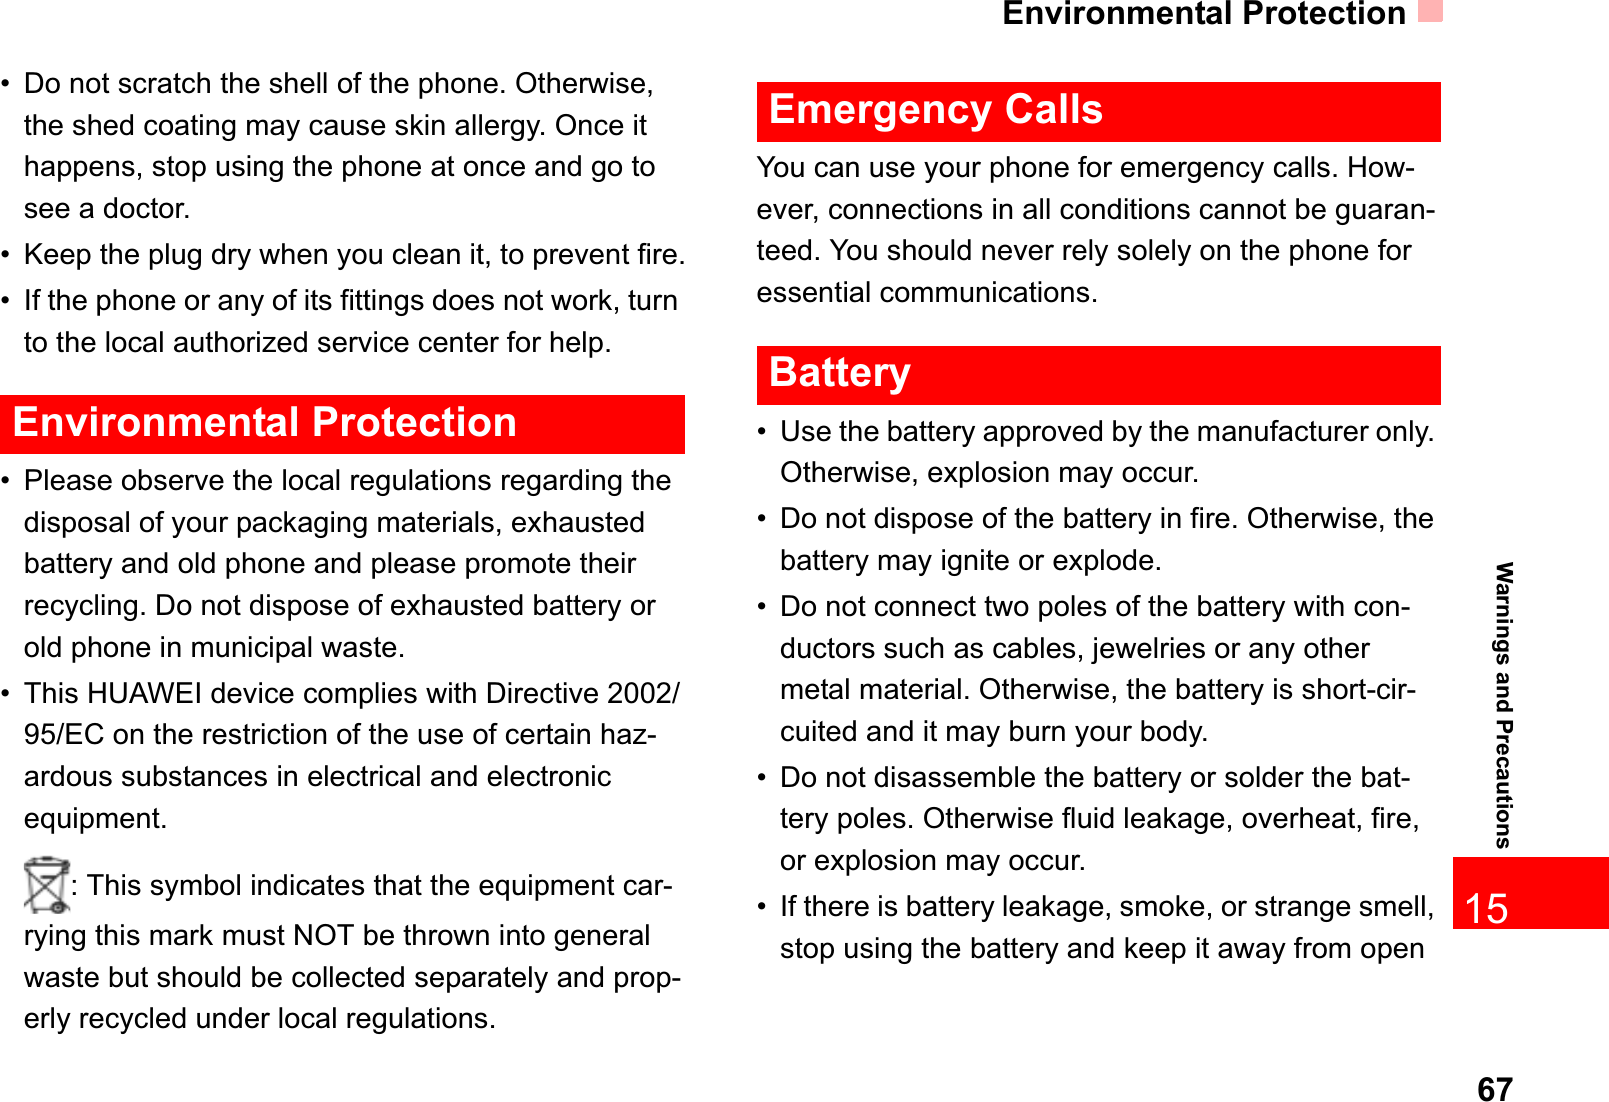 Environmental Protection6715Warnings and Precautions• Do not scratch the shell of the phone. Otherwise, the shed coating may cause skin allergy. Once it happens, stop using the phone at once and go to see a doctor.• Keep the plug dry when you clean it, to prevent fire.• If the phone or any of its fittings does not work, turn to the local authorized service center for help.Environmental Protection• Please observe the local regulations regarding the disposal of your packaging materials, exhausted battery and old phone and please promote their recycling. Do not dispose of exhausted battery or old phone in municipal waste.• This HUAWEI device complies with Directive 2002/95/EC on the restriction of the use of certain haz-ardous substances in electrical and electronic equipment.: This symbol indicates that the equipment car-rying this mark must NOT be thrown into general waste but should be collected separately and prop-erly recycled under local regulations.Emergency CallsYou can use your phone for emergency calls. How-ever, connections in all conditions cannot be guaran-teed. You should never rely solely on the phone for essential communications.Battery• Use the battery approved by the manufacturer only. Otherwise, explosion may occur.• Do not dispose of the battery in fire. Otherwise, the battery may ignite or explode.• Do not connect two poles of the battery with con-ductors such as cables, jewelries or any other metal material. Otherwise, the battery is short-cir-cuited and it may burn your body.• Do not disassemble the battery or solder the bat-tery poles. Otherwise fluid leakage, overheat, fire, or explosion may occur.• If there is battery leakage, smoke, or strange smell, stop using the battery and keep it away from open 